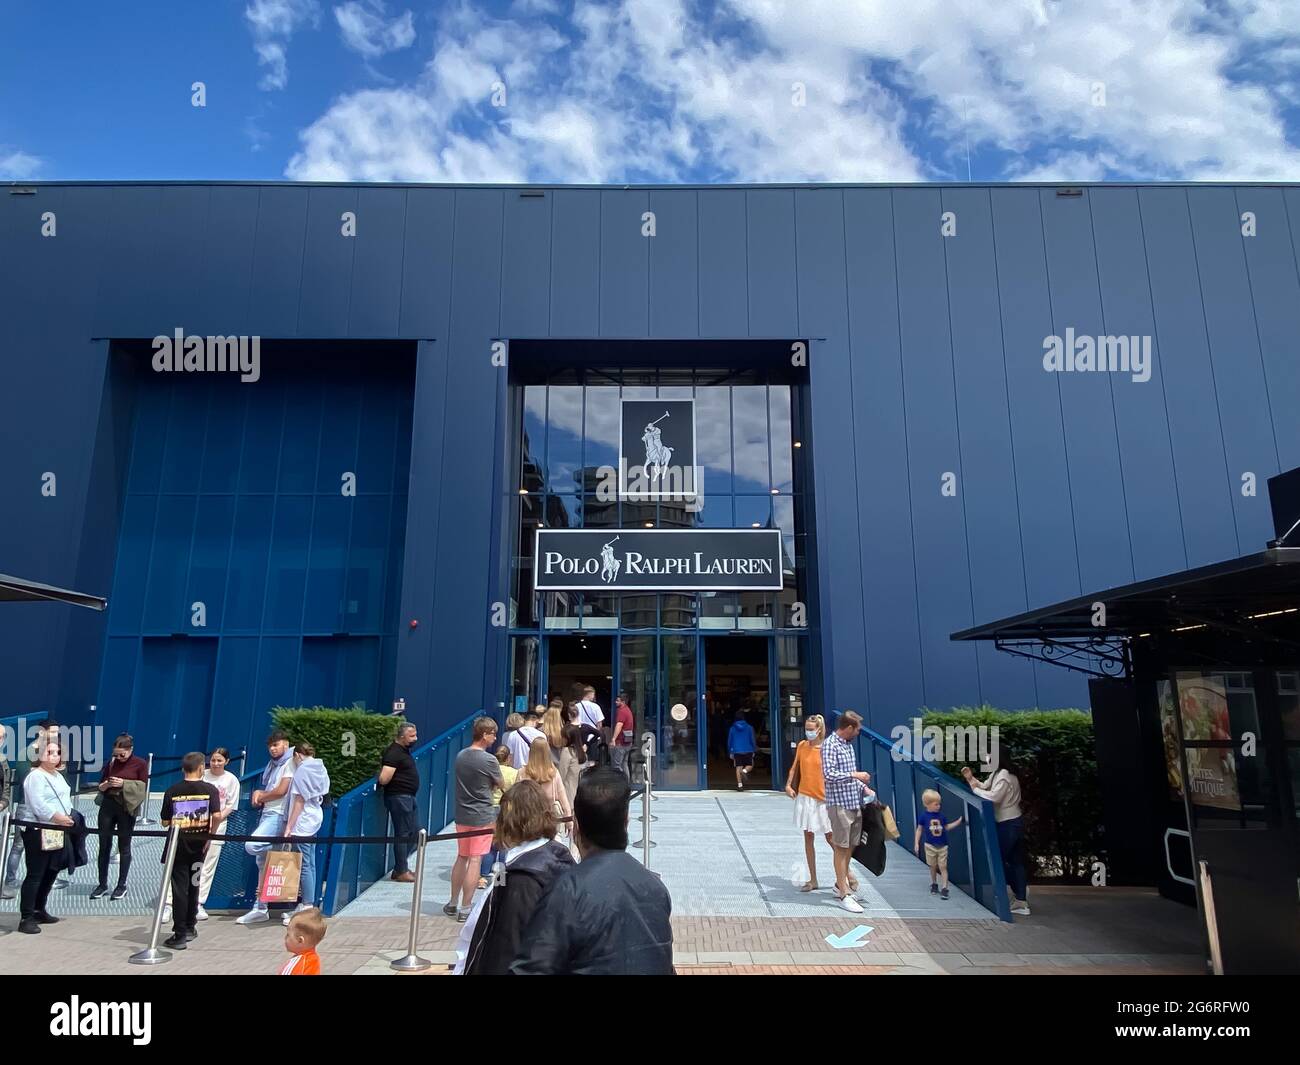 Roermond, Netherlands - July 1. 2021: View on blue facade of polo ralph  lauren fashion store with queue of people exterior of entrance Stock Photo  - Alamy